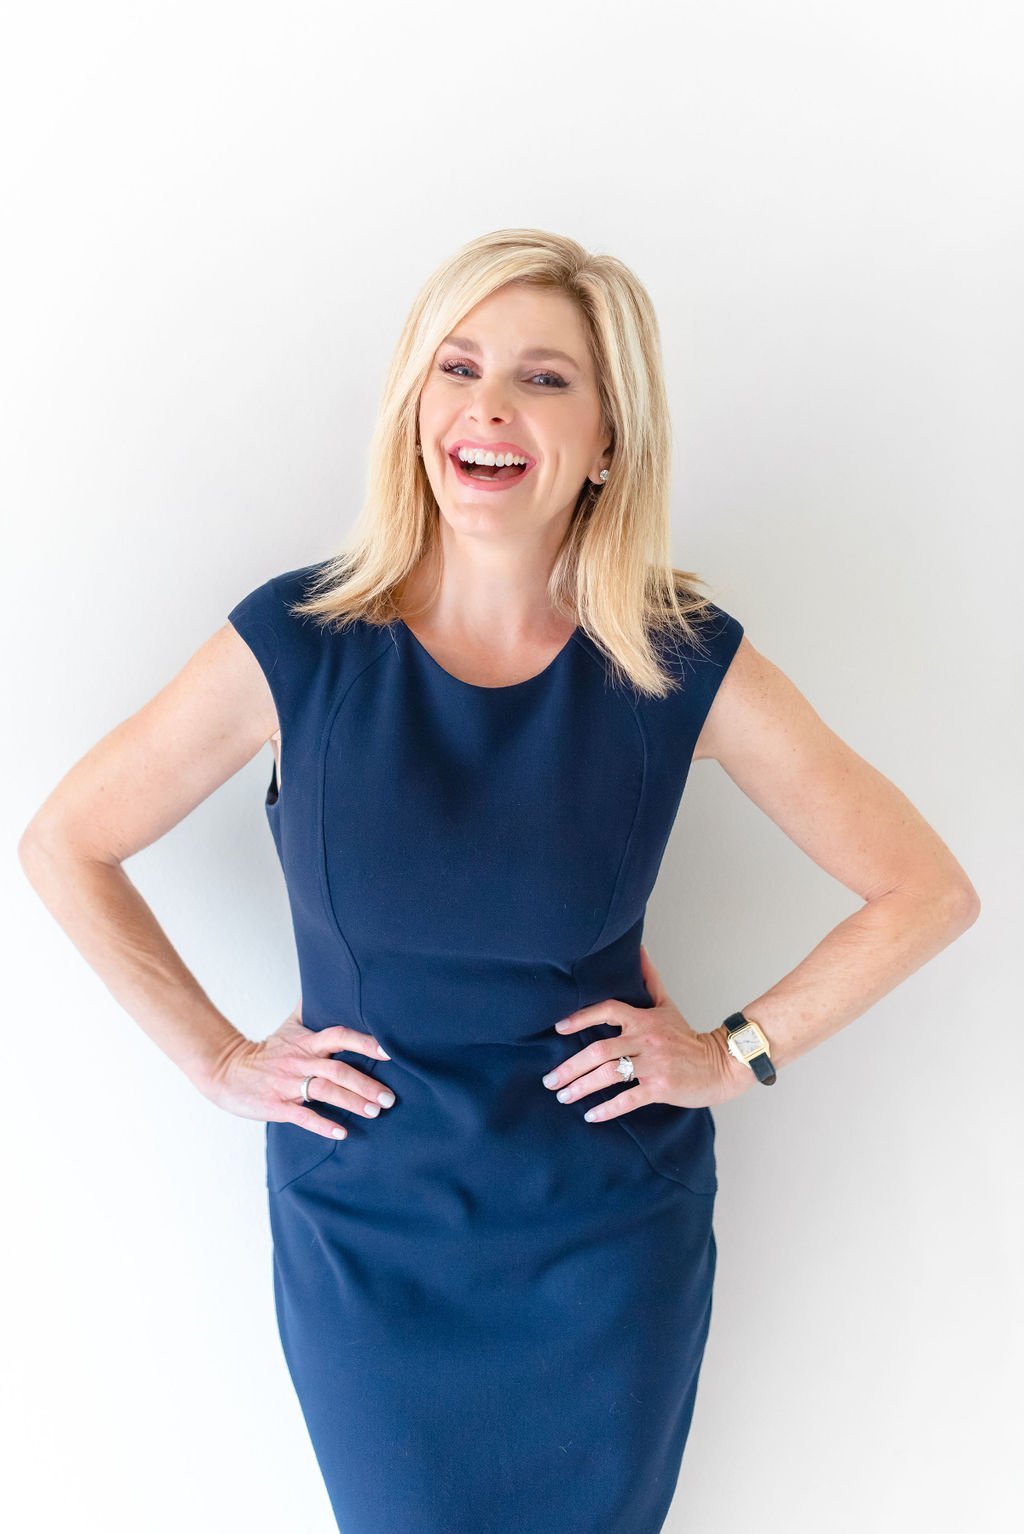 Best Influencers Over 40, Including Tanya Foster from Tanya Foster Blog